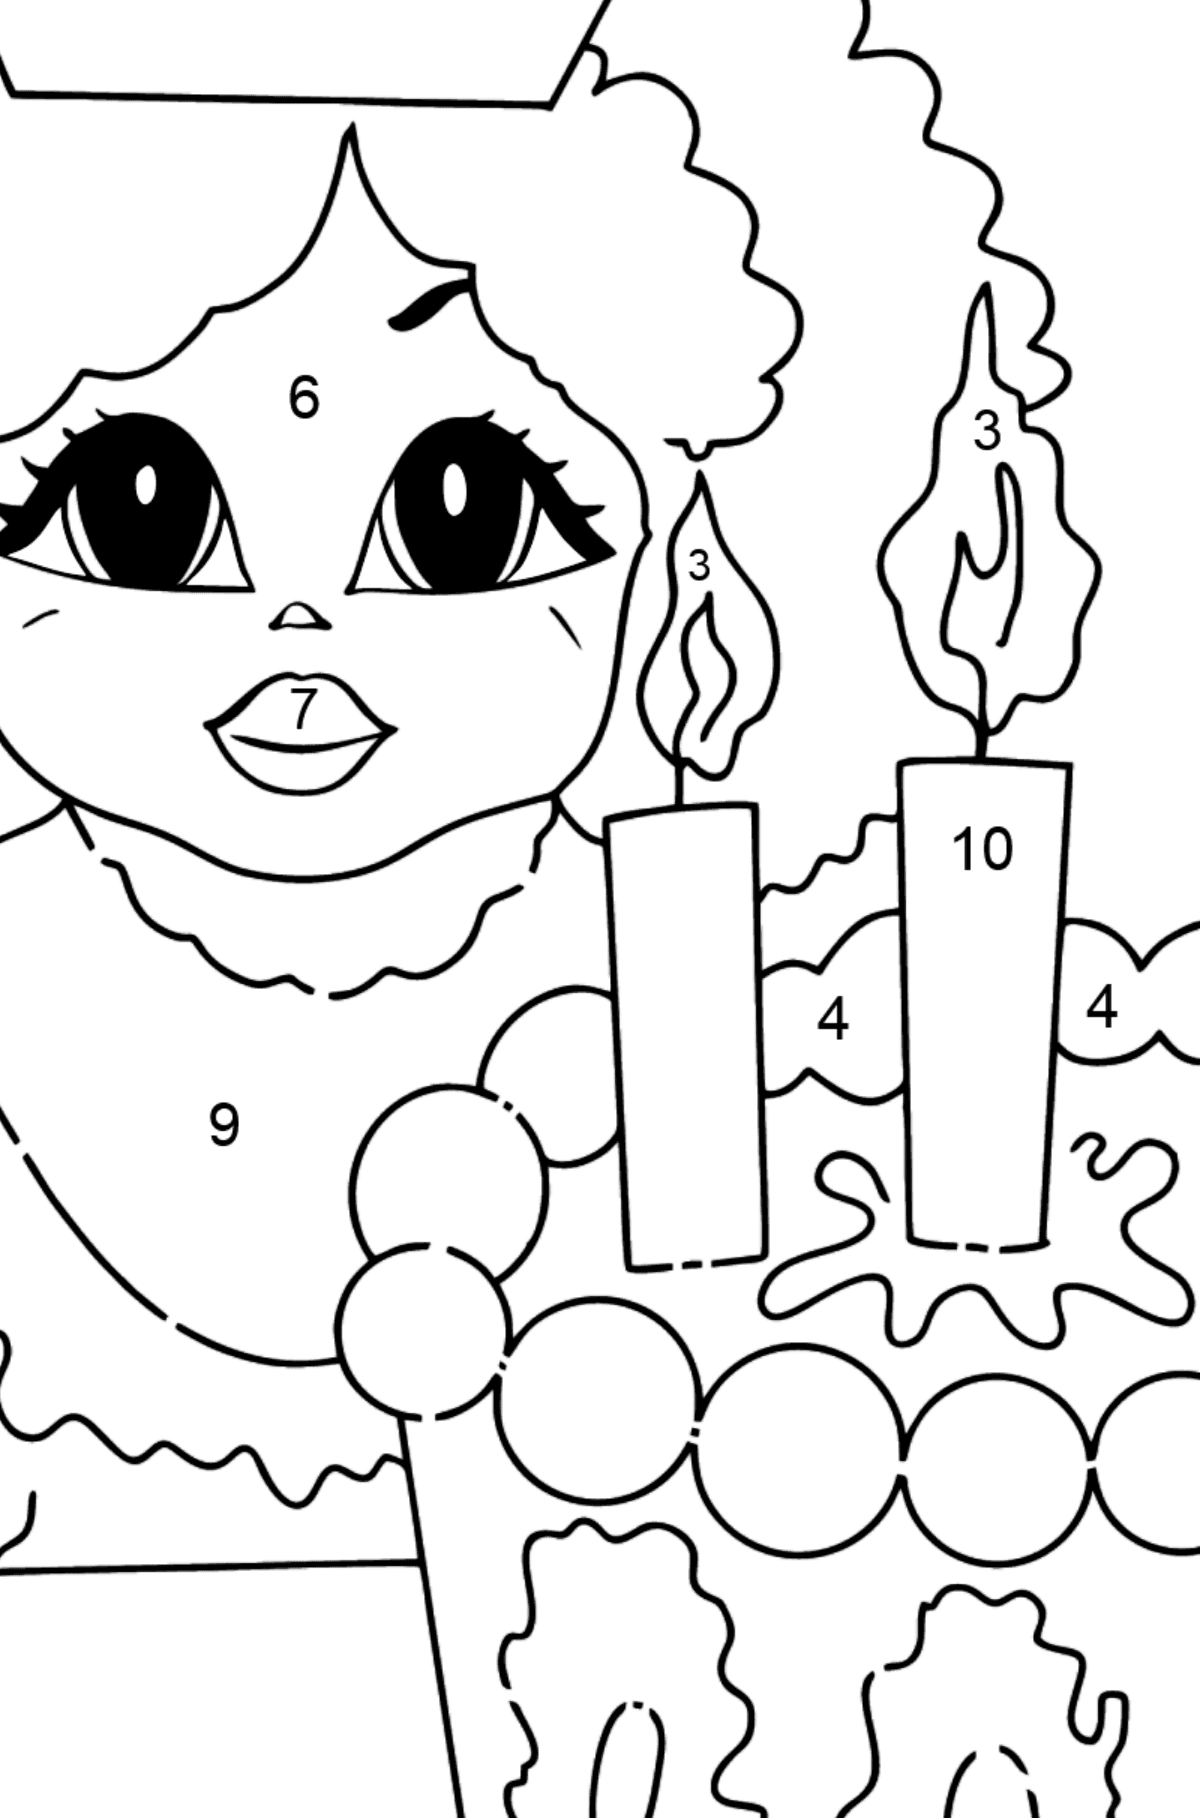 Coloring Page - A Princess with Cake - For Girls - Coloring by Numbers for Kids